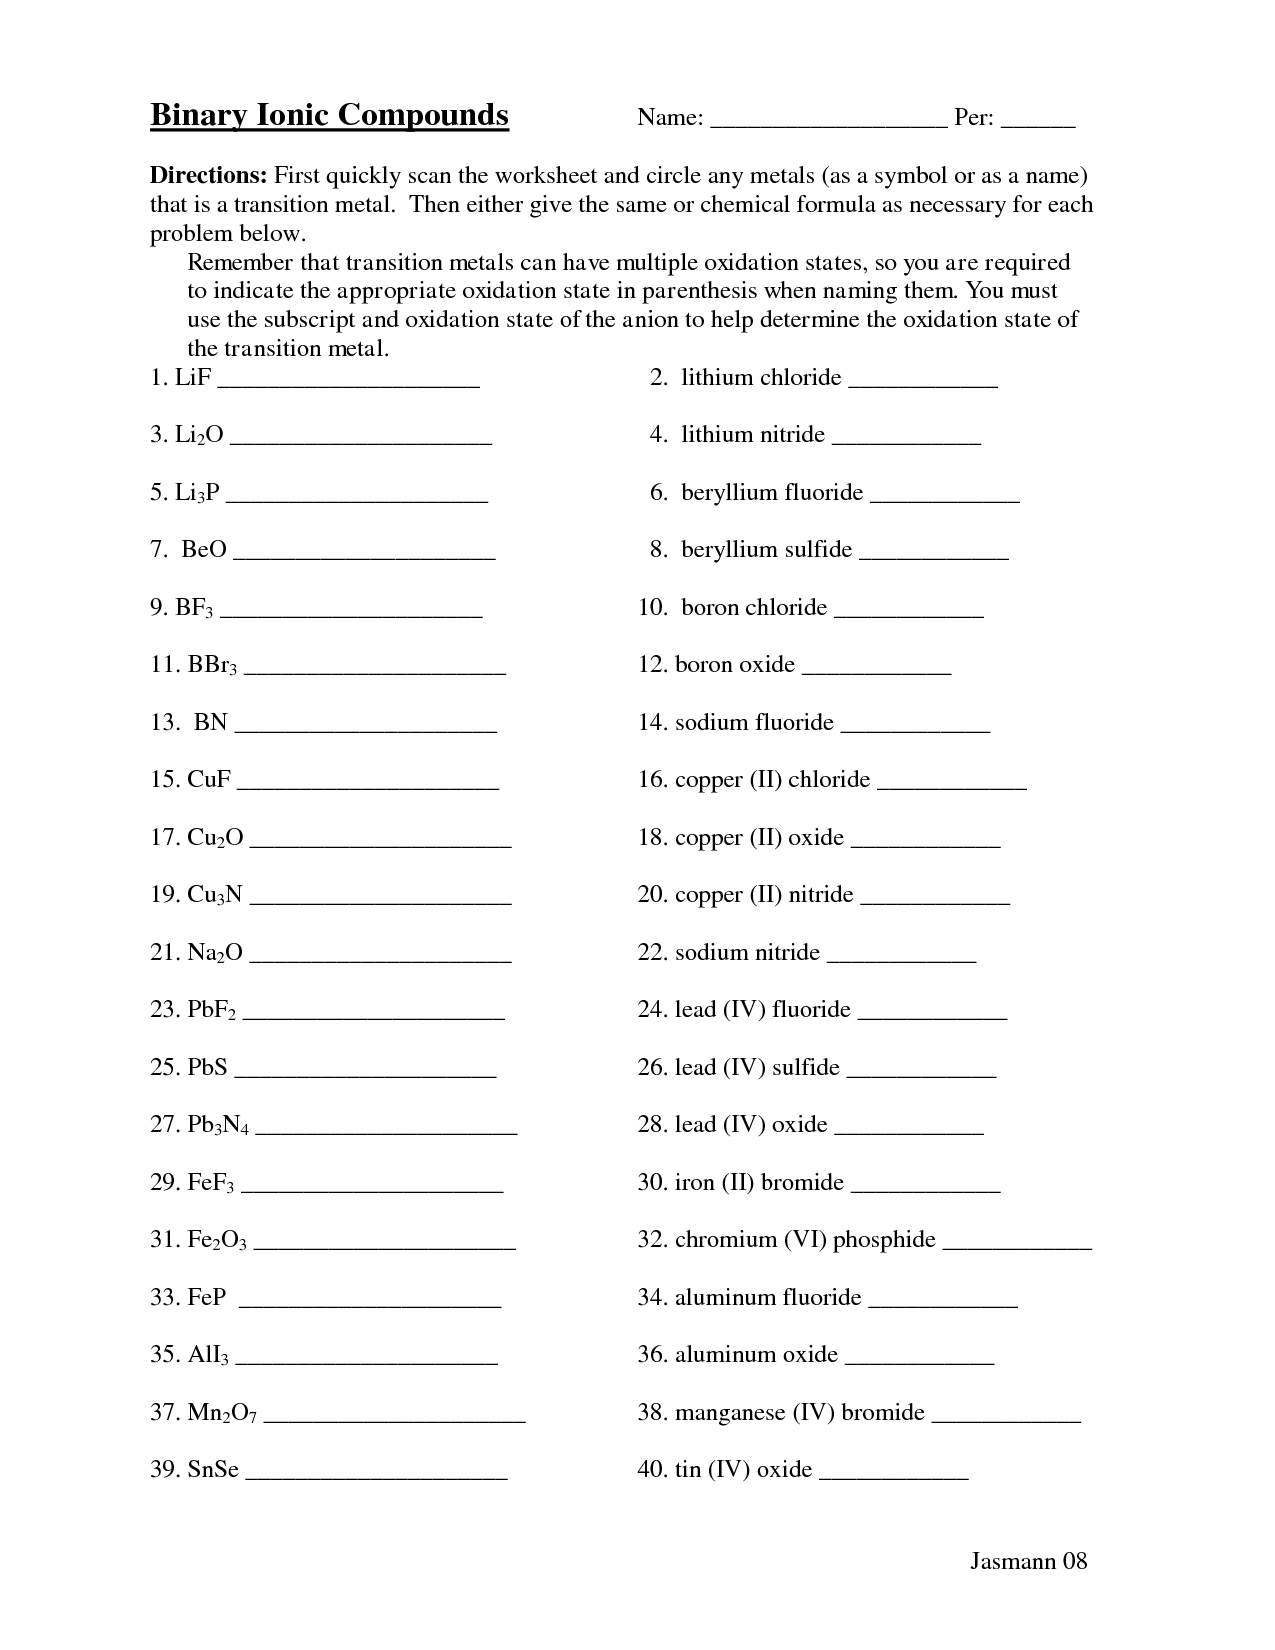 Naming Ionic Compounds Worksheets With Regard To Simple Binary Ionic Compounds Worksheet